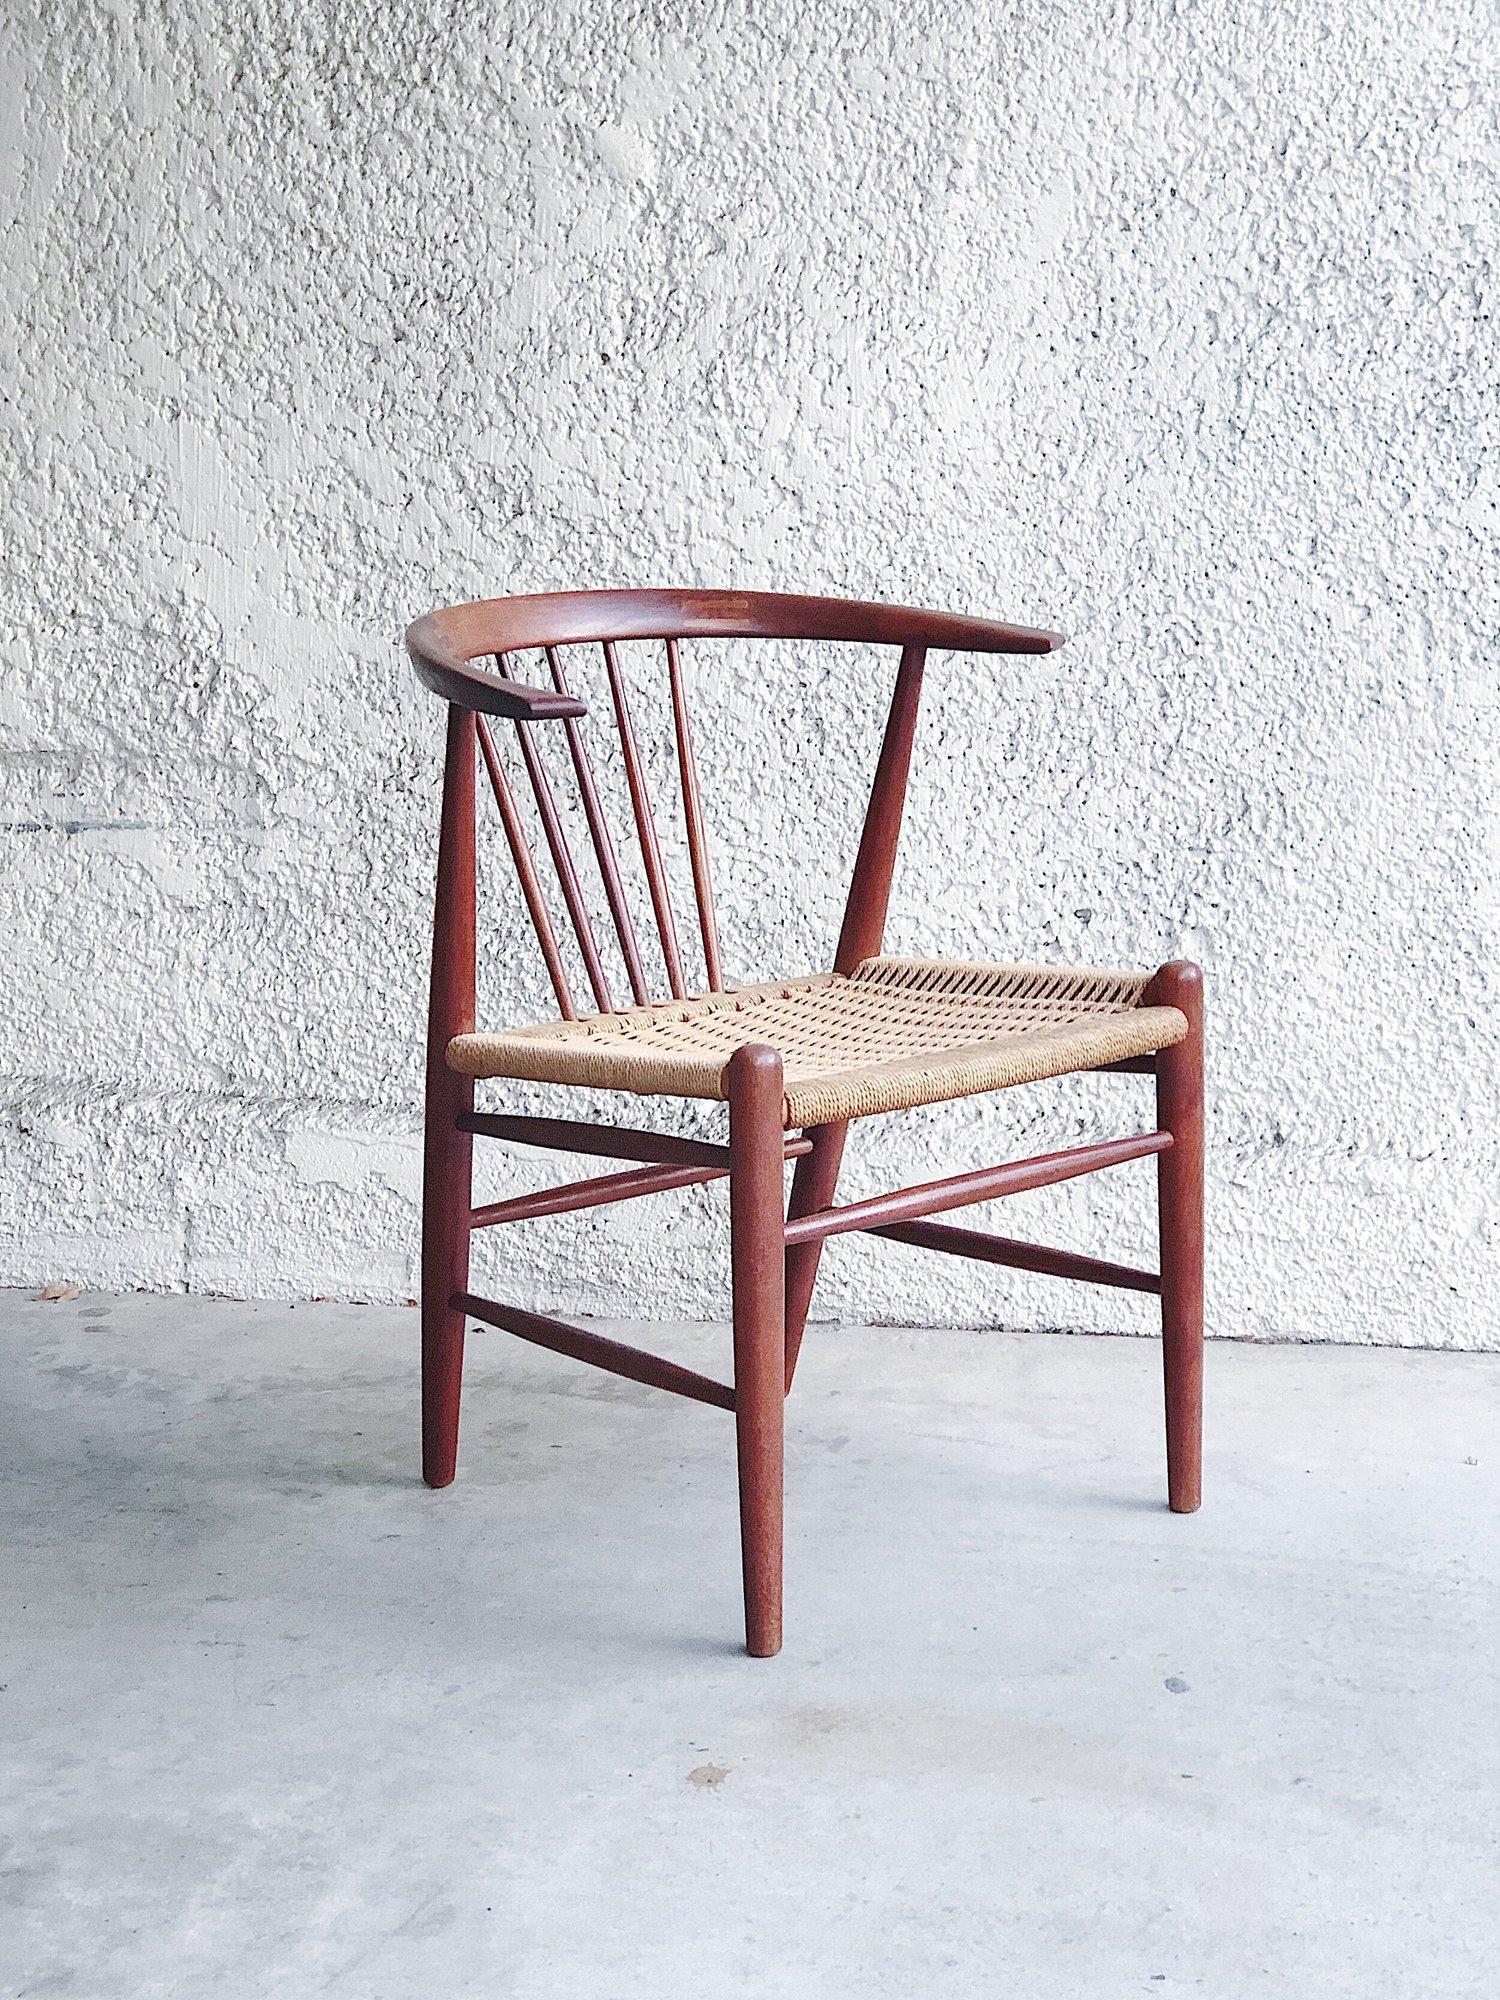 “24GT” Side chair by Illum Wikkelsø for Niels Eilersen, imported from Denmark by The Otto Gerau Co., made in Denmark, C. 1959. Dowel back construction, solid teak wood with hand-rubbed oil finish and woven Danish paper cord seat.

DIMENSIONS:

23” L